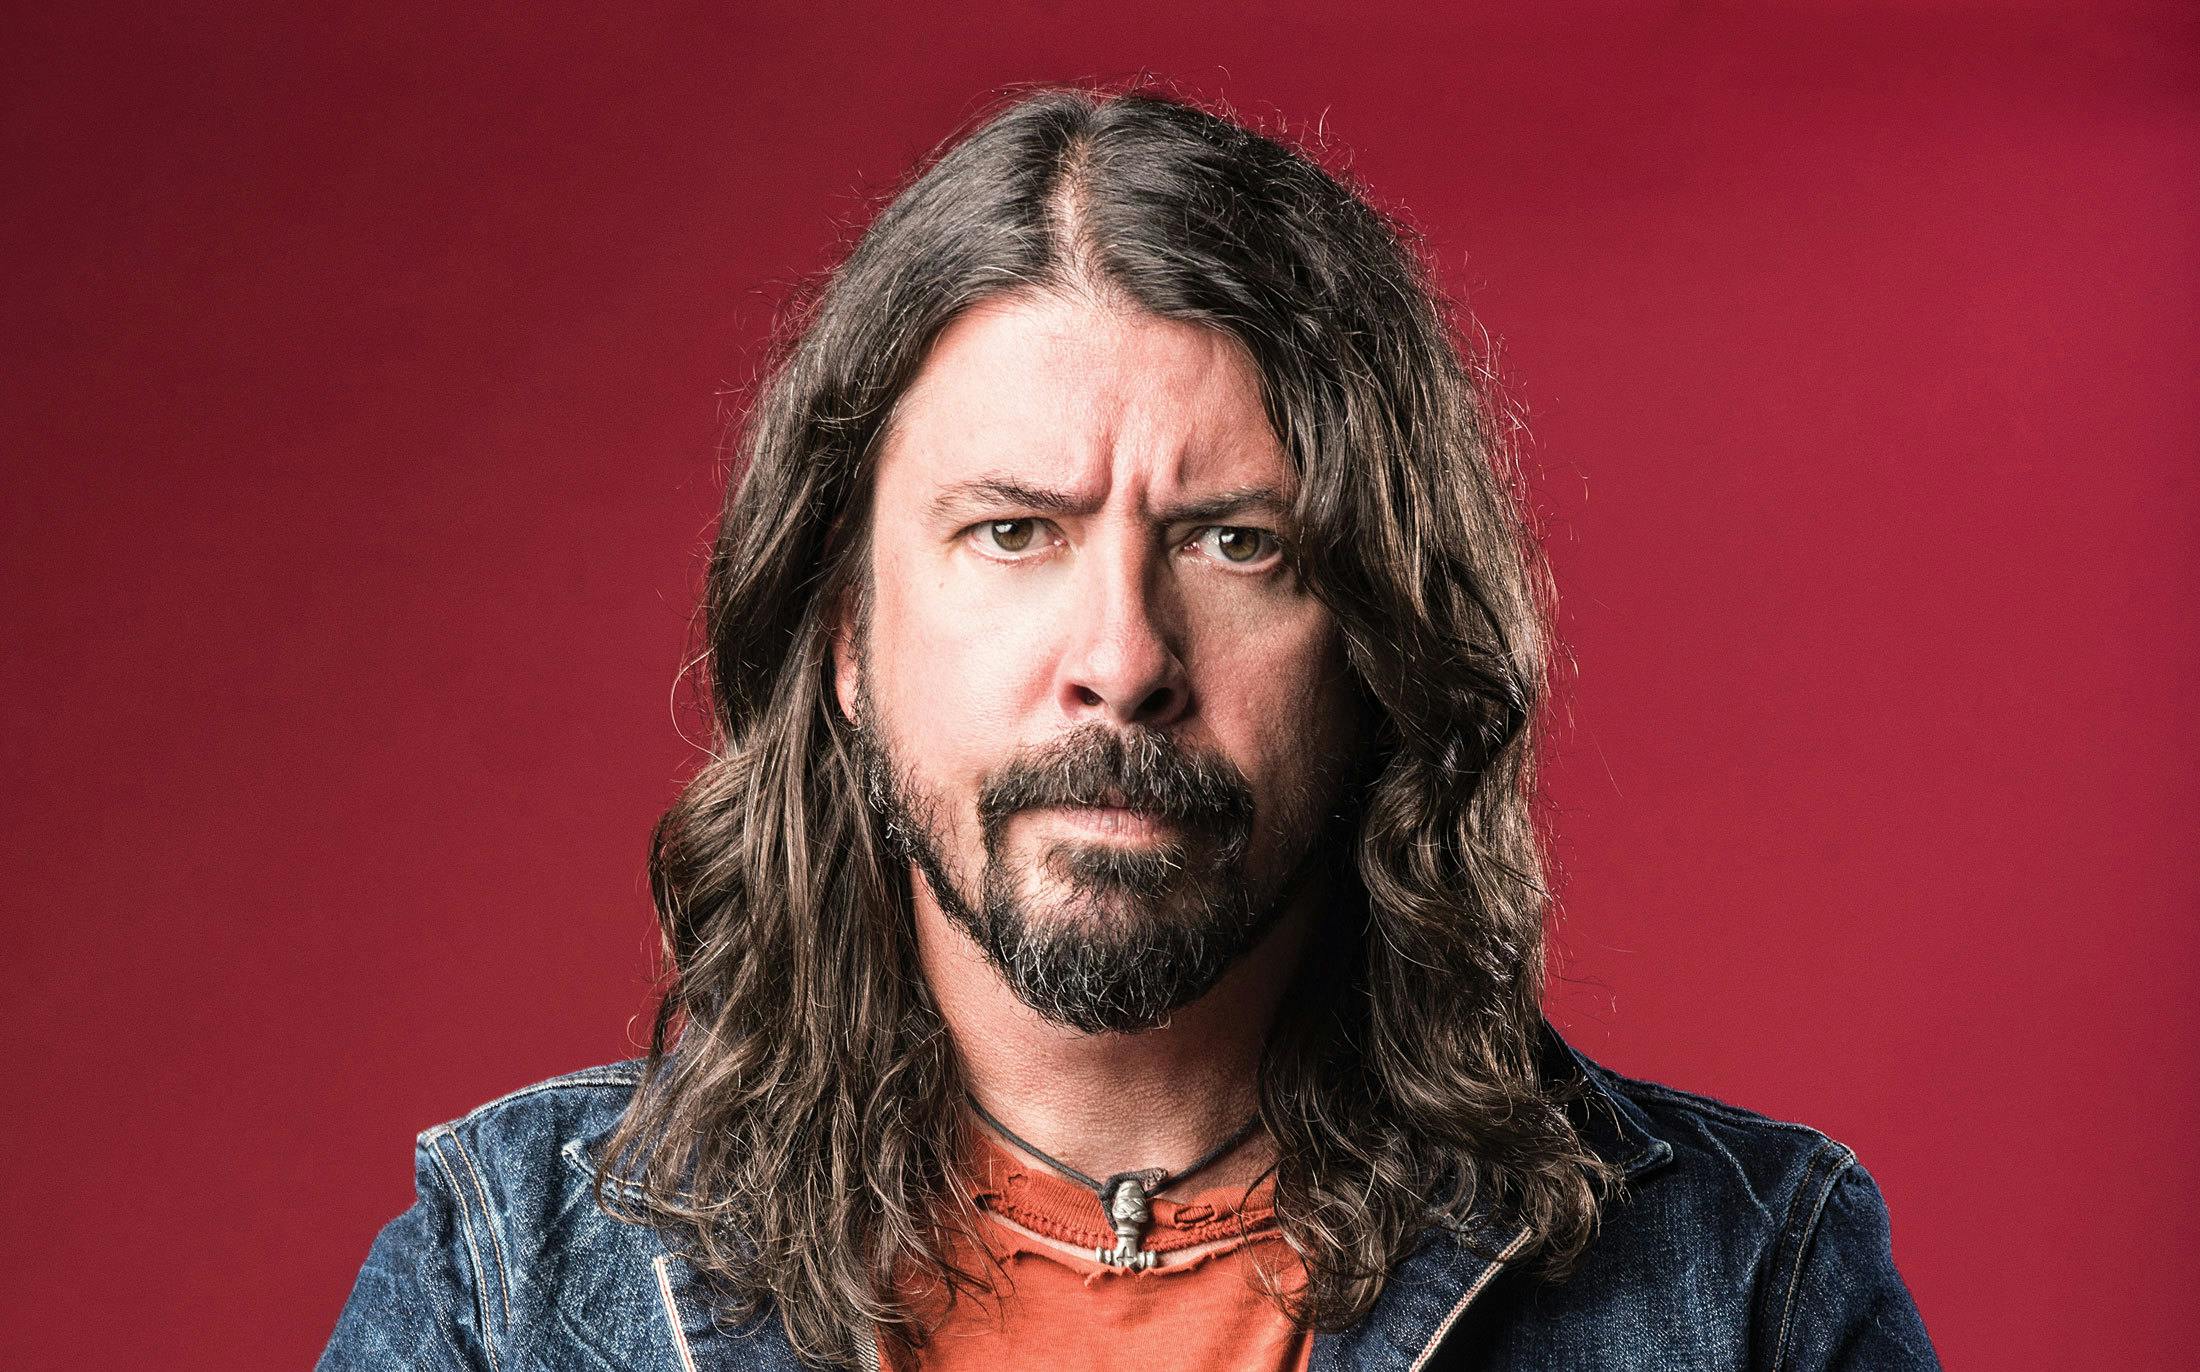 BBC Two to air career-spanning, in-depth interview with Dave Grohl